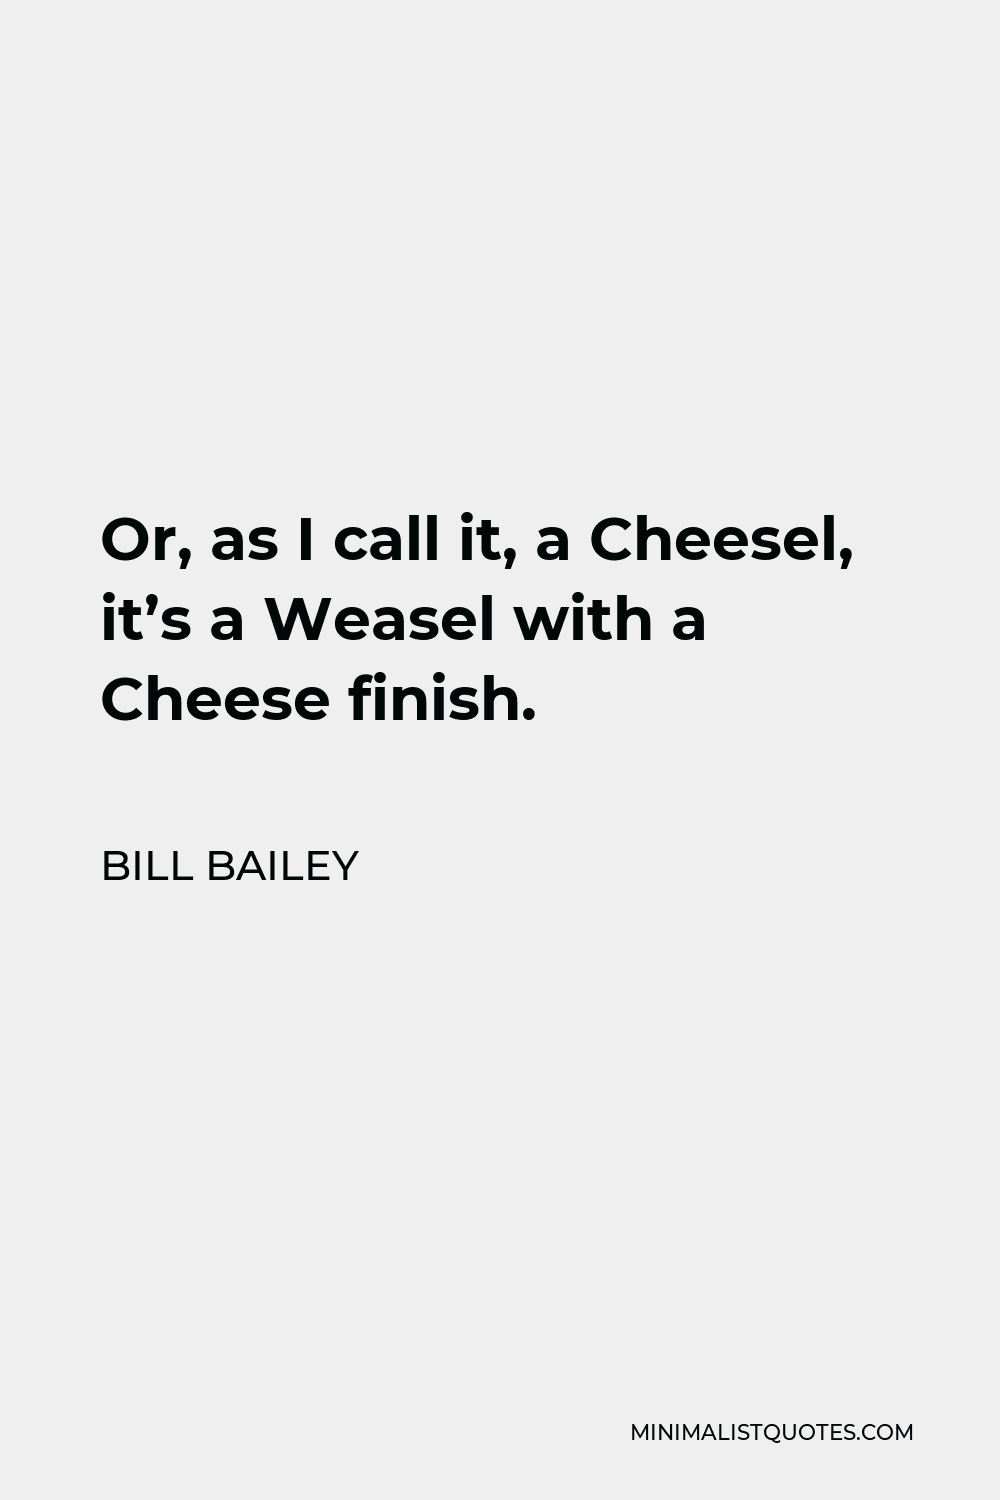 Bill Bailey Quote - Or, as I call it, a Cheesel, it’s a Weasel with a Cheese finish.